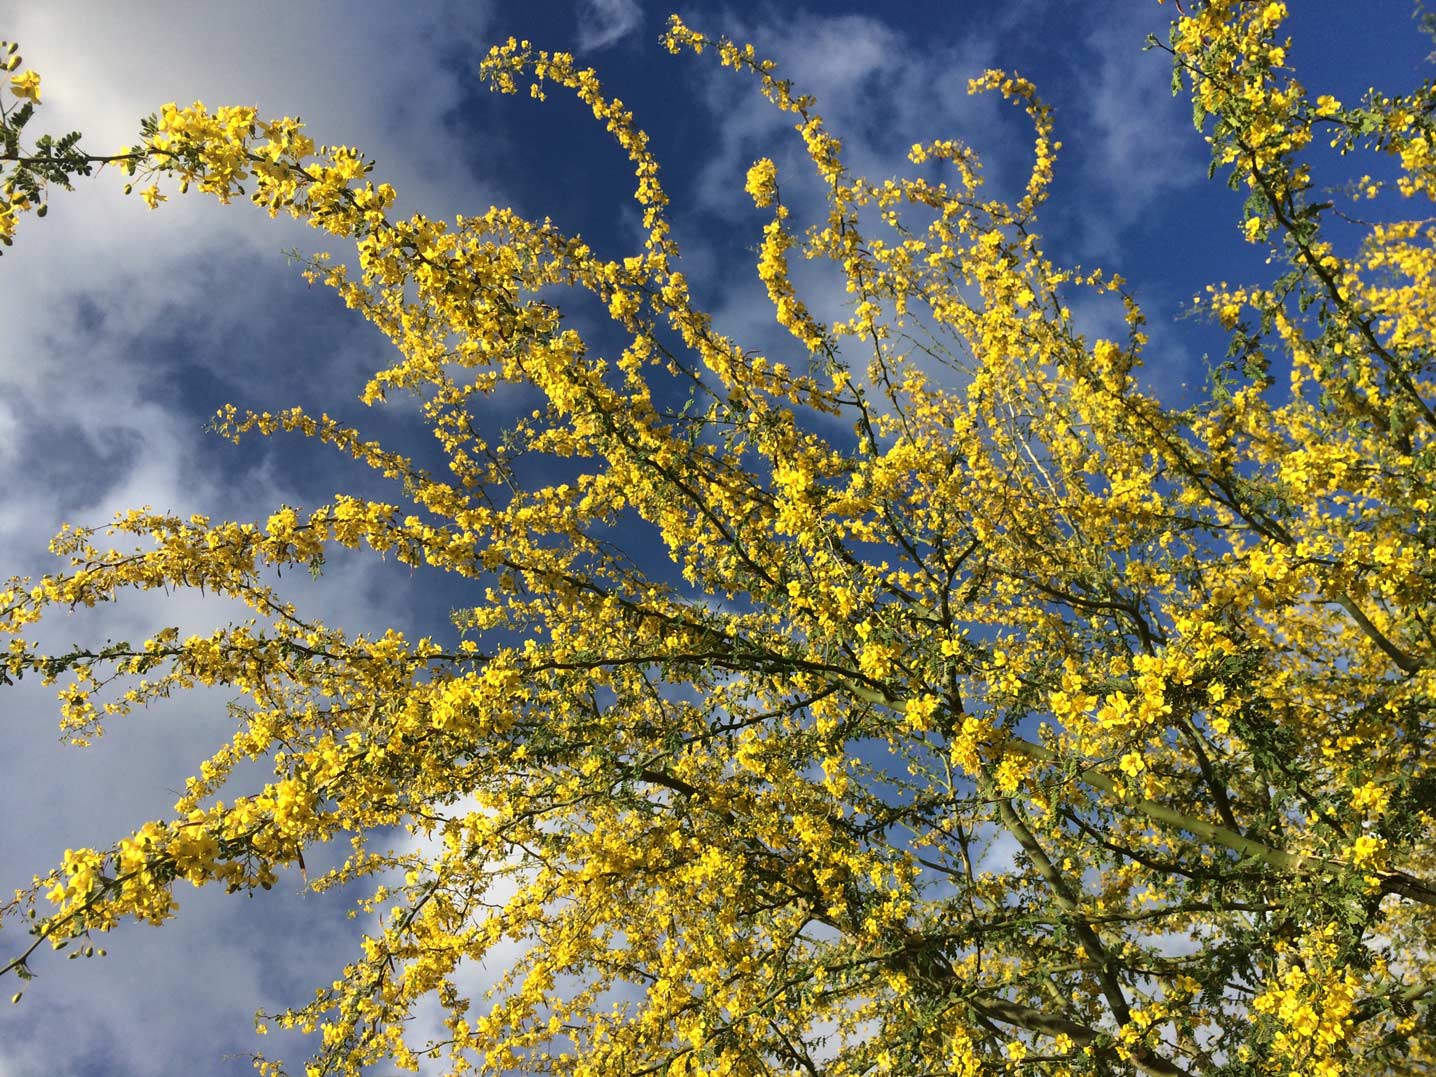 Multiple branches of Palo Brea with yellow blooms along each branch.